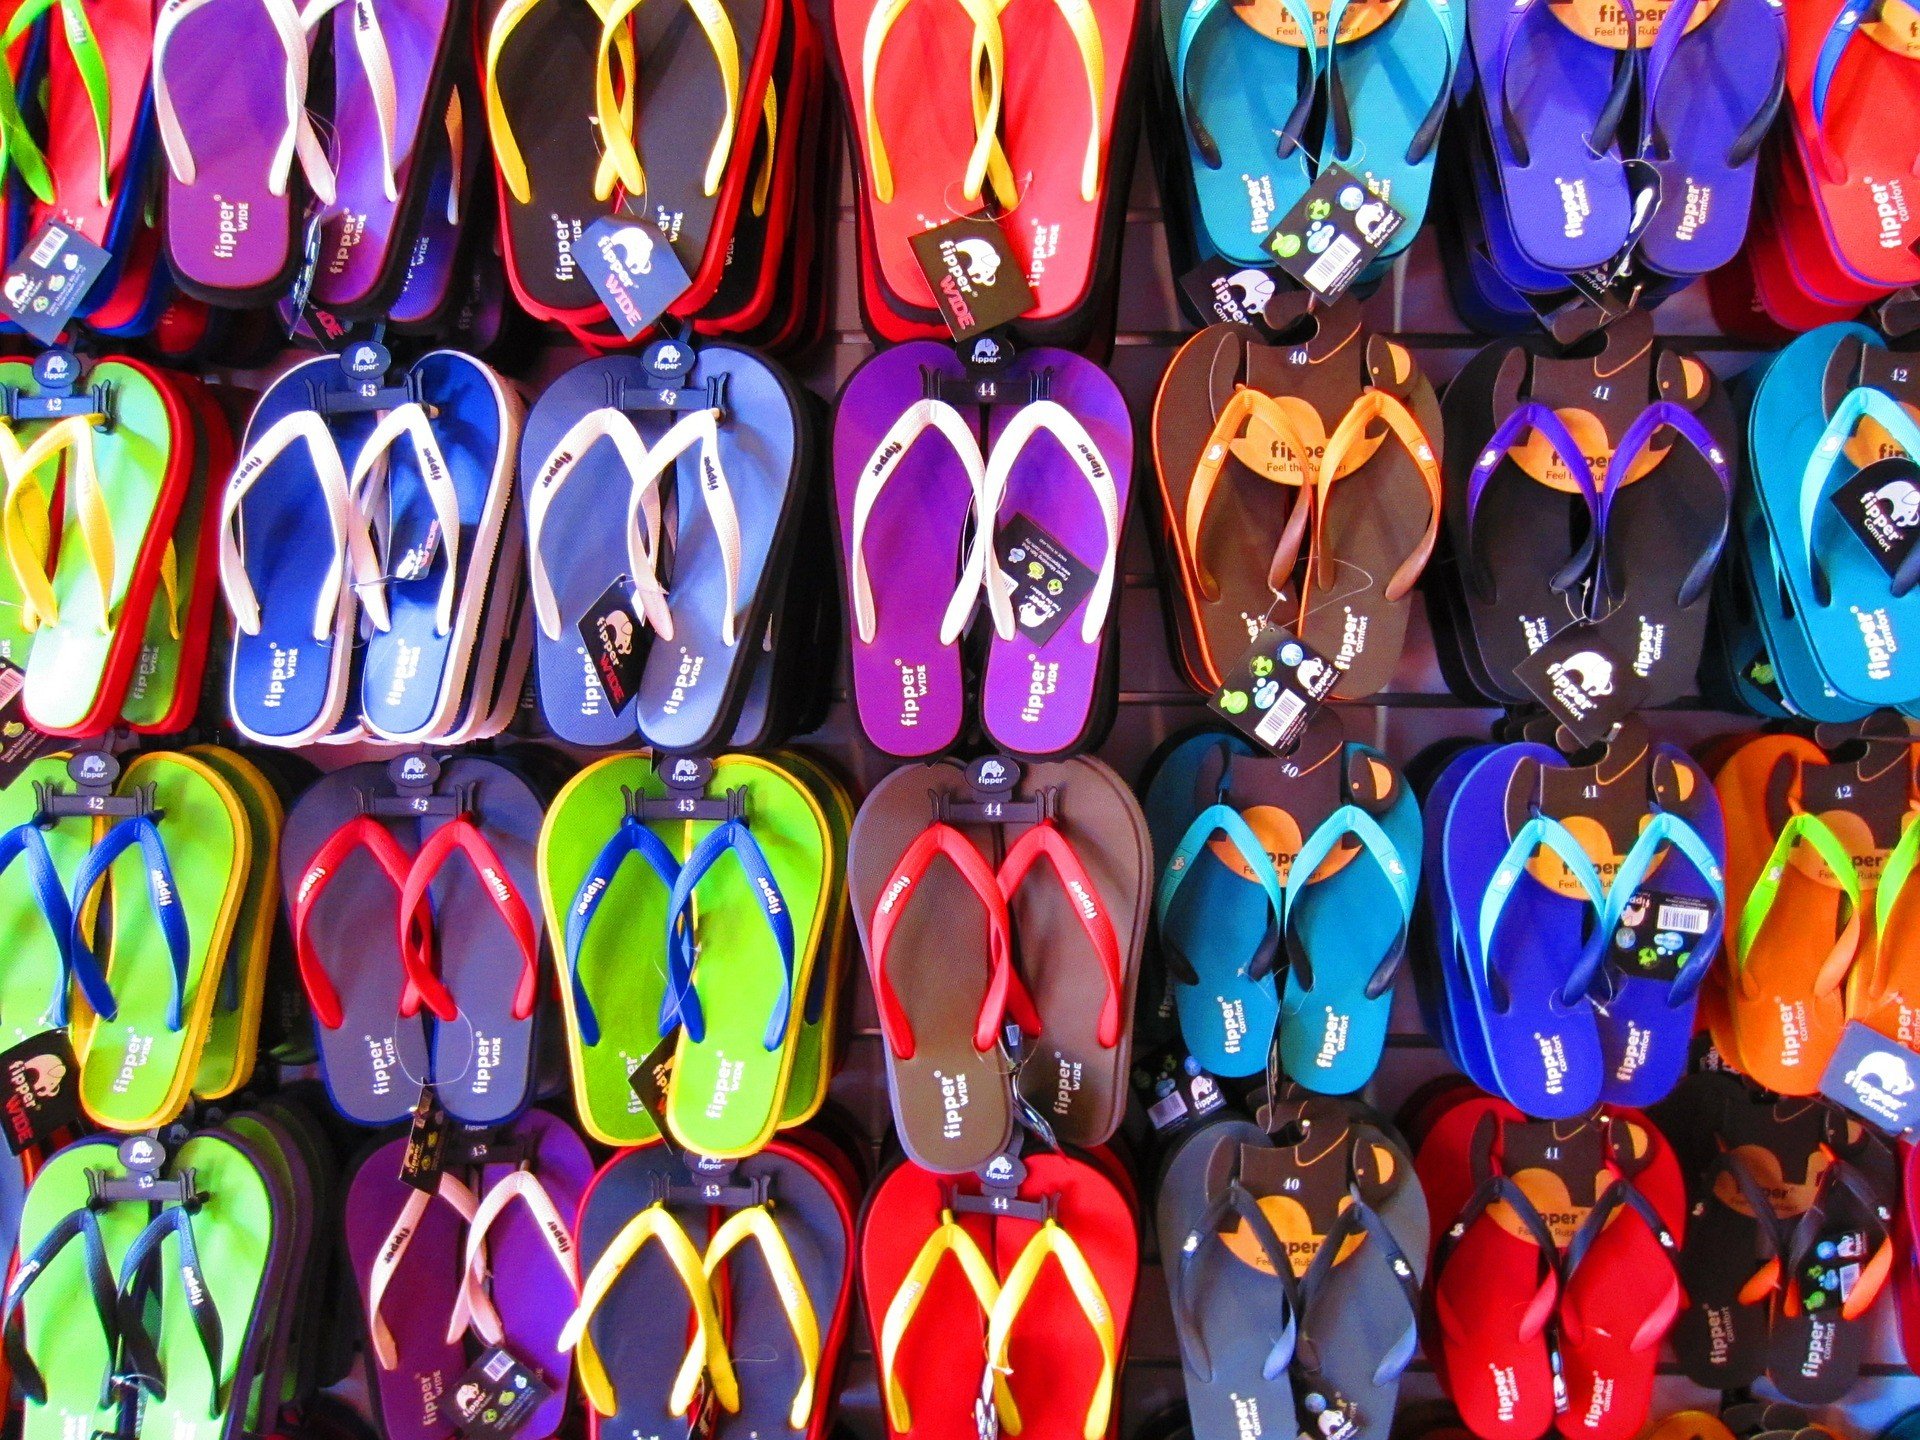 Picture of a wall of flip-flops.